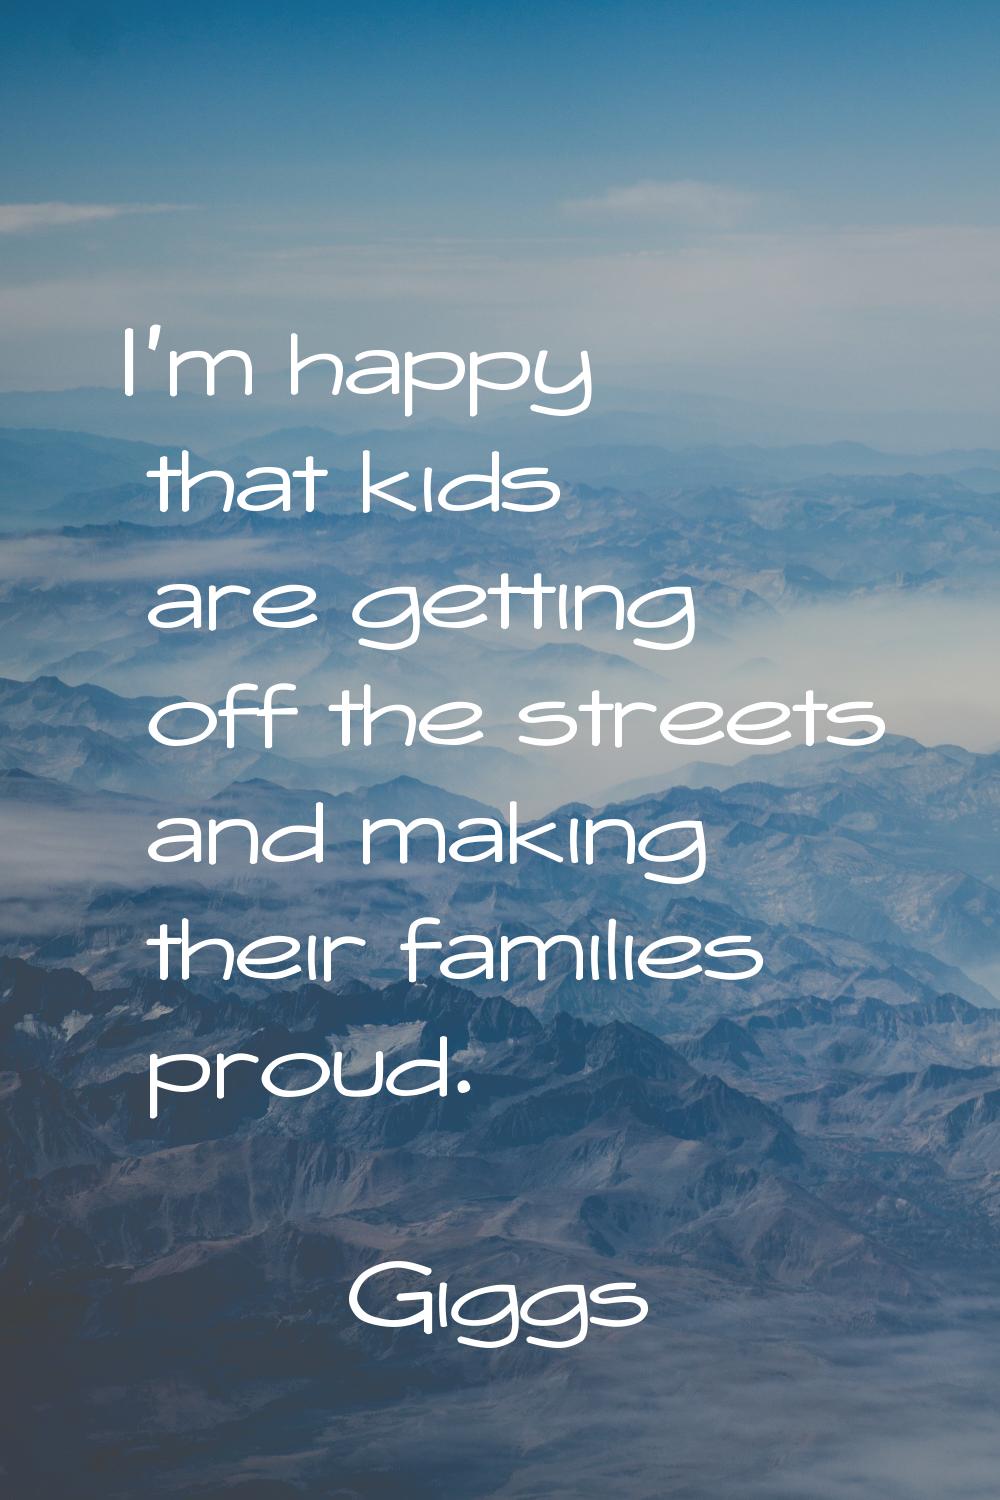 I'm happy that kids are getting off the streets and making their families proud.